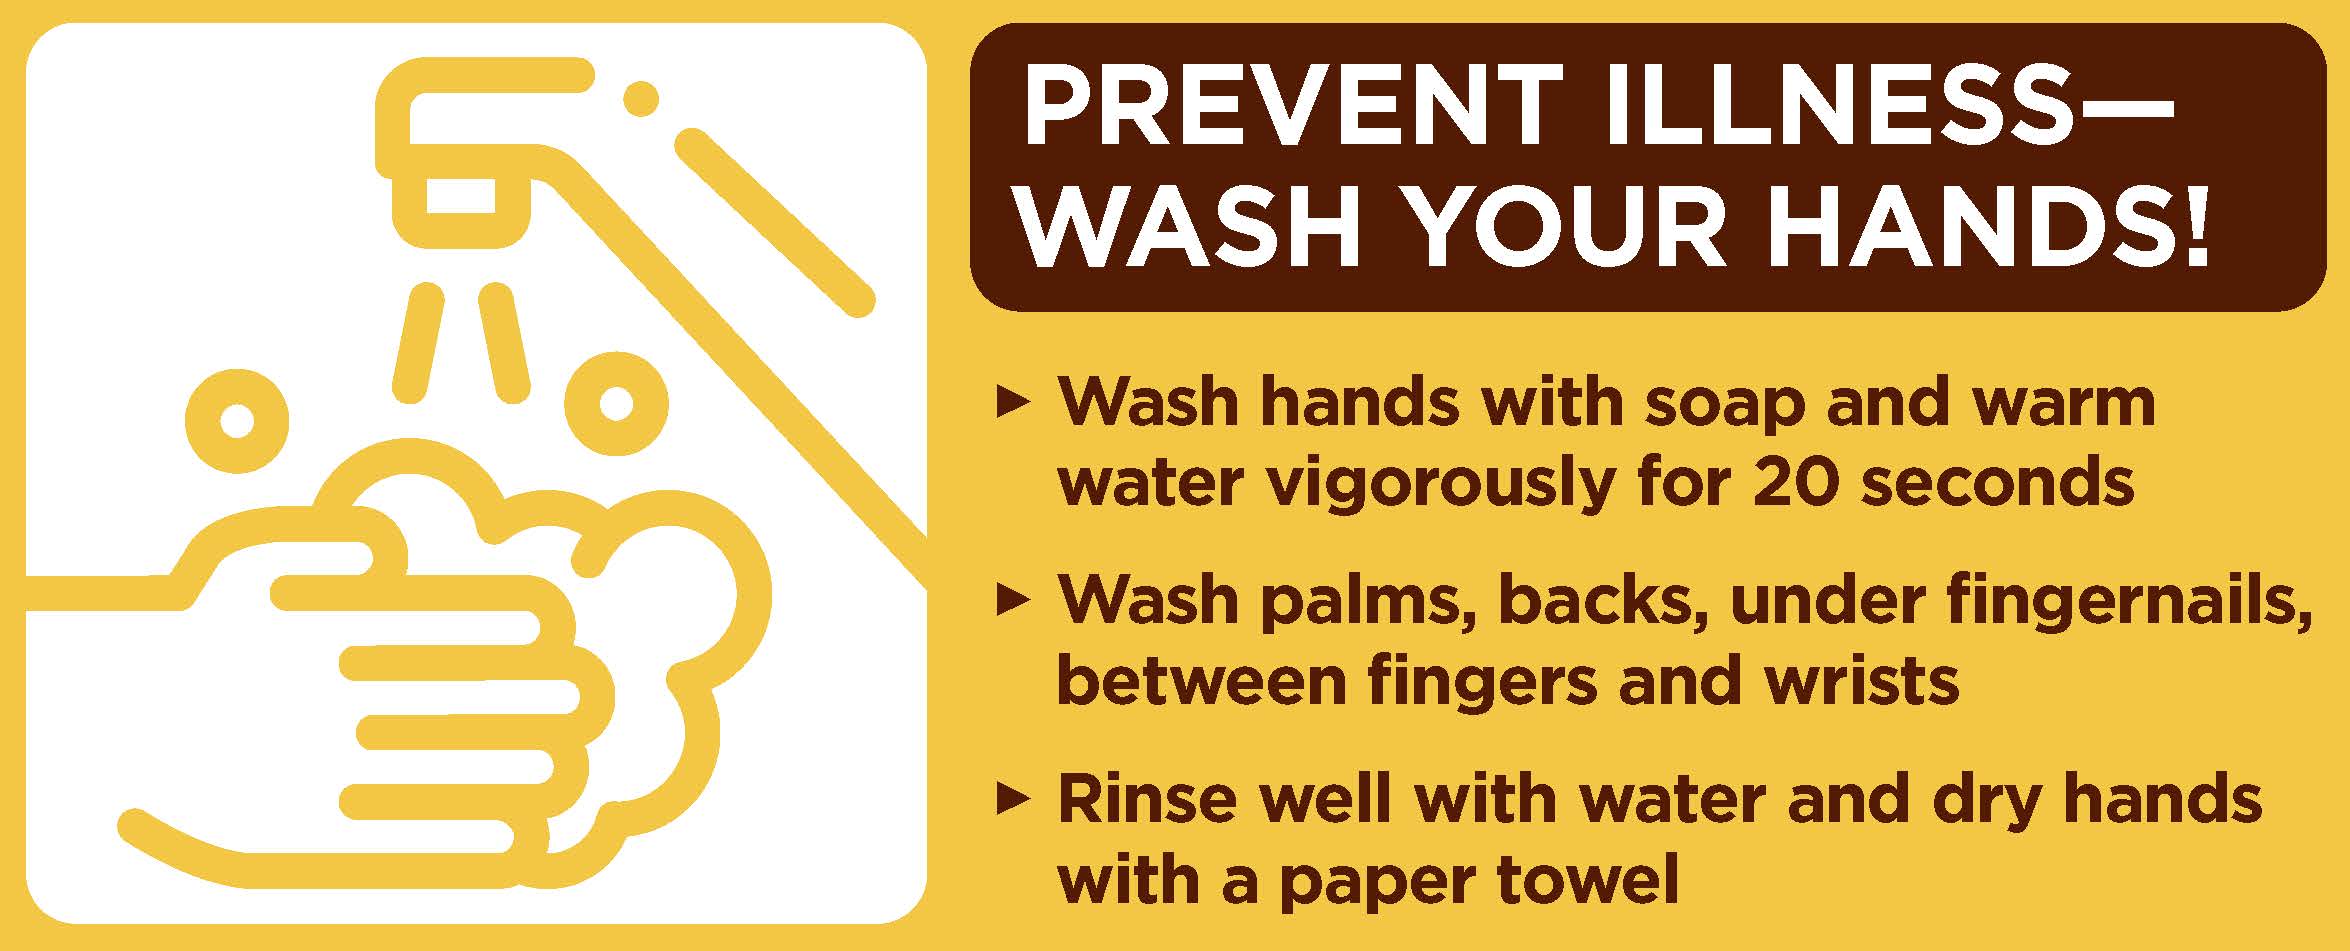 Prevent Illness Wash Your hands, 20 secs, wash palms, backs, nails, between fingers and wrists, Rinse with water and dry with paper towel 